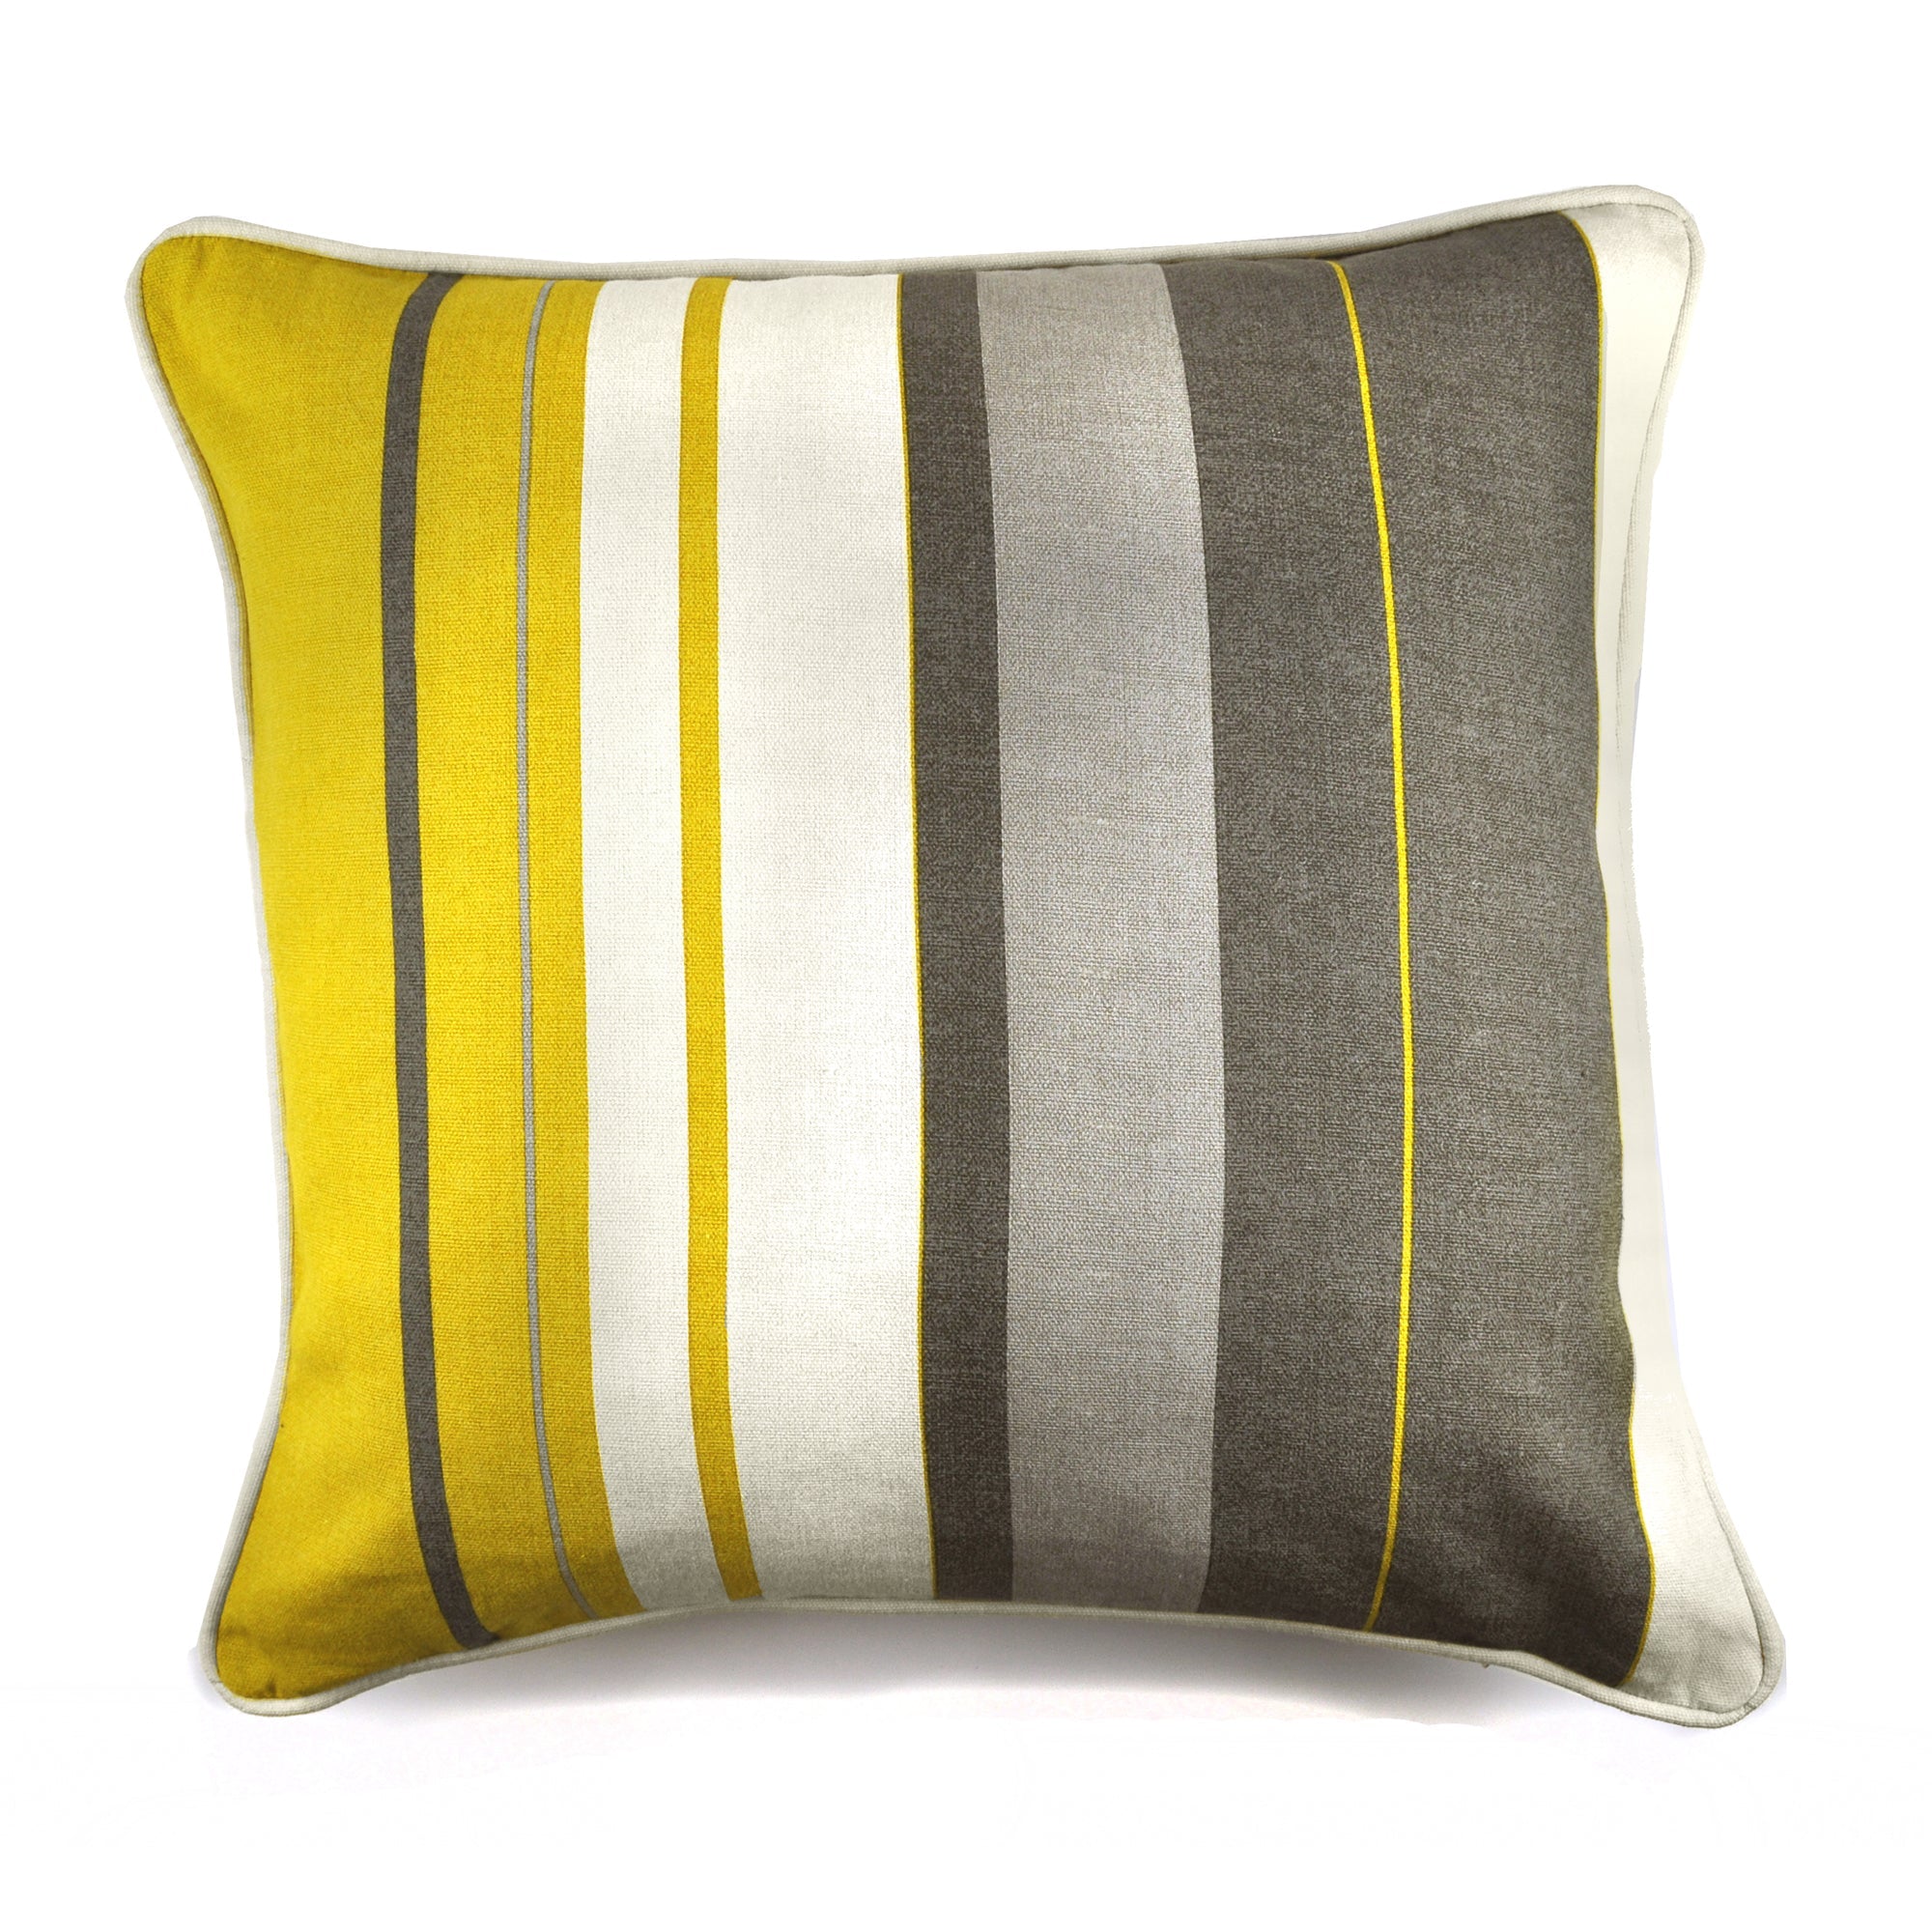 Whitworth Stripe- Square Cushion Covers - by Fusion